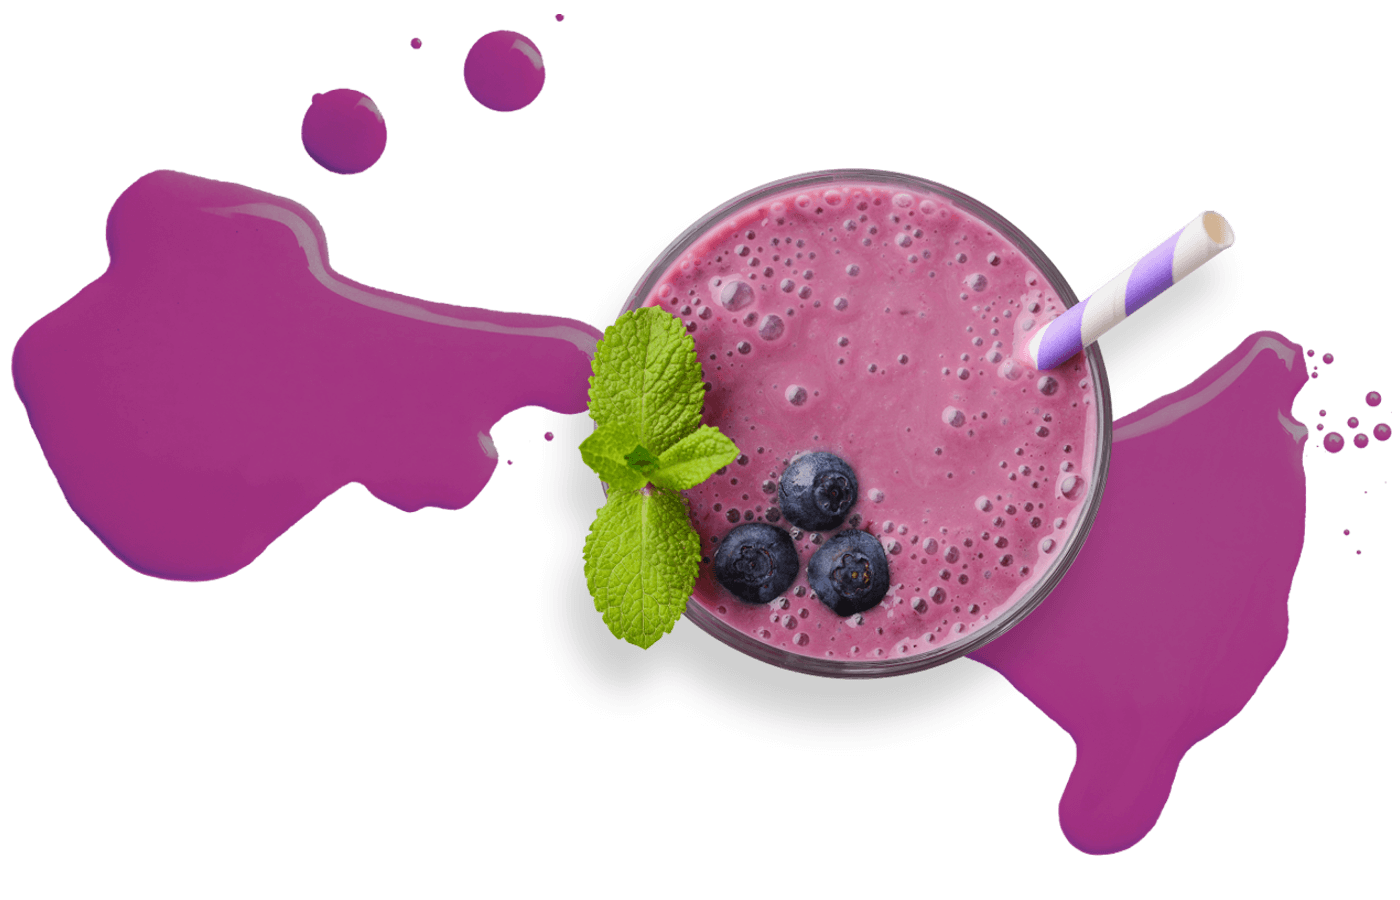 http://yogopink.com/wp-content/uploads/2017/09/smoothie_03.png